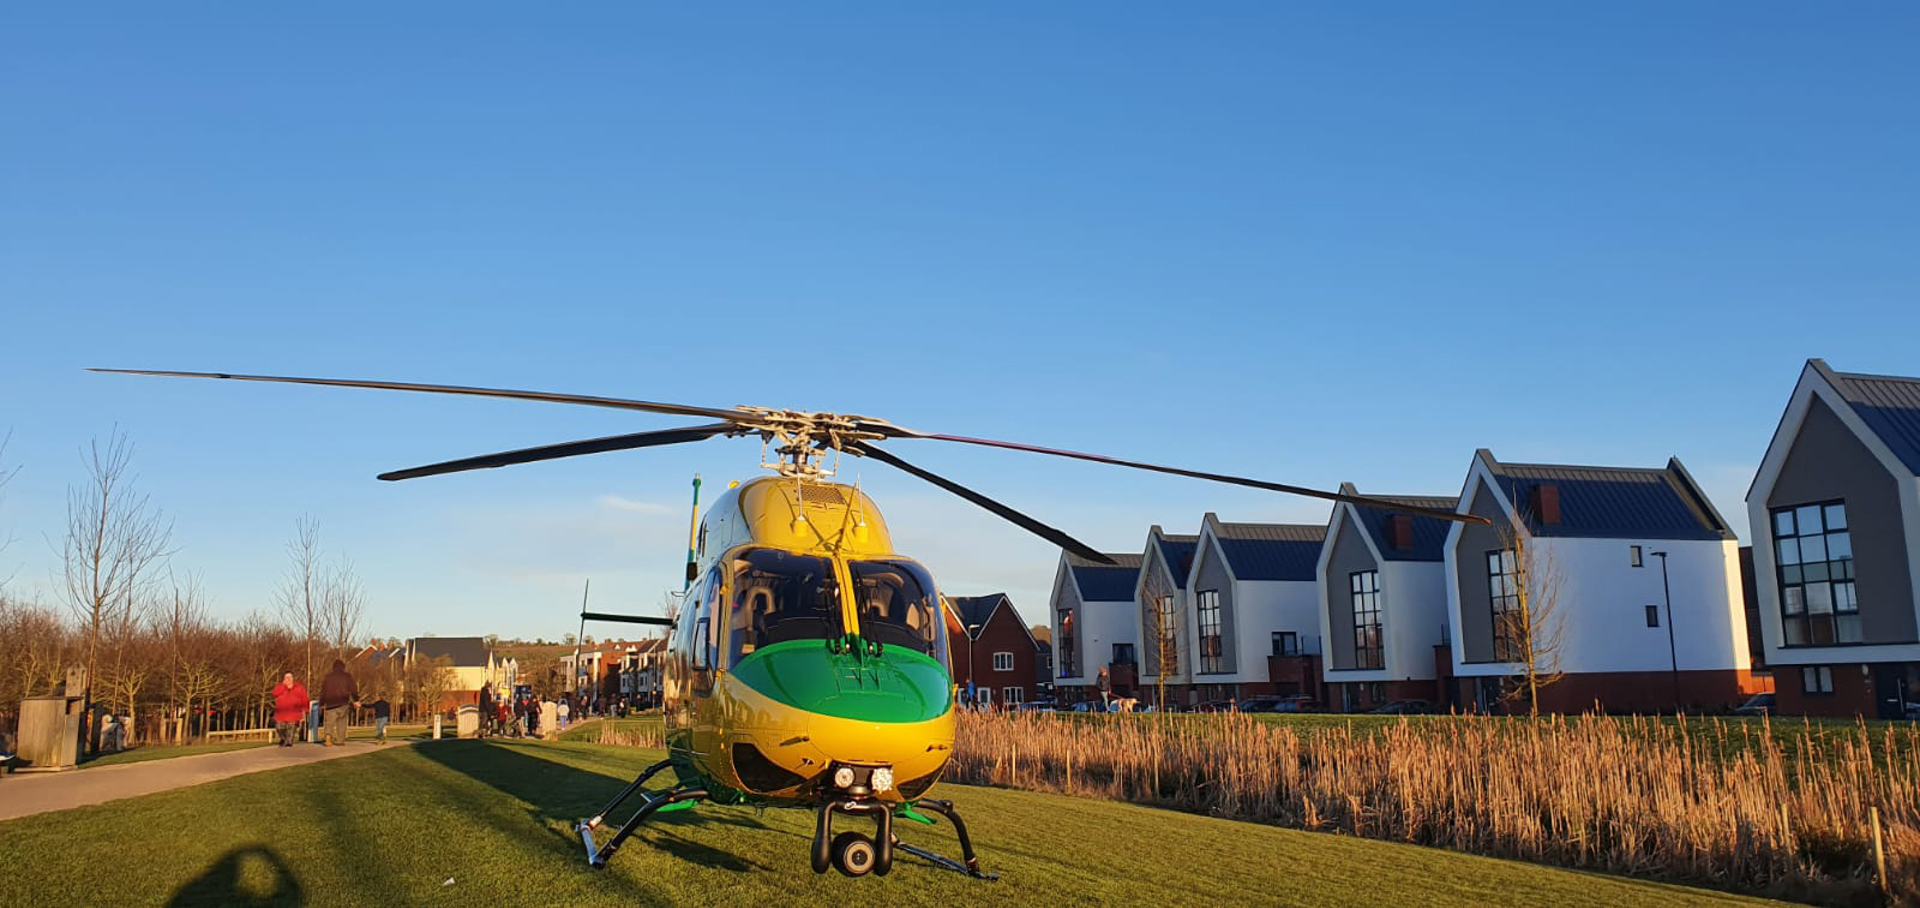 Wiltshire Air Ambulance's helicopter landed in Swindon